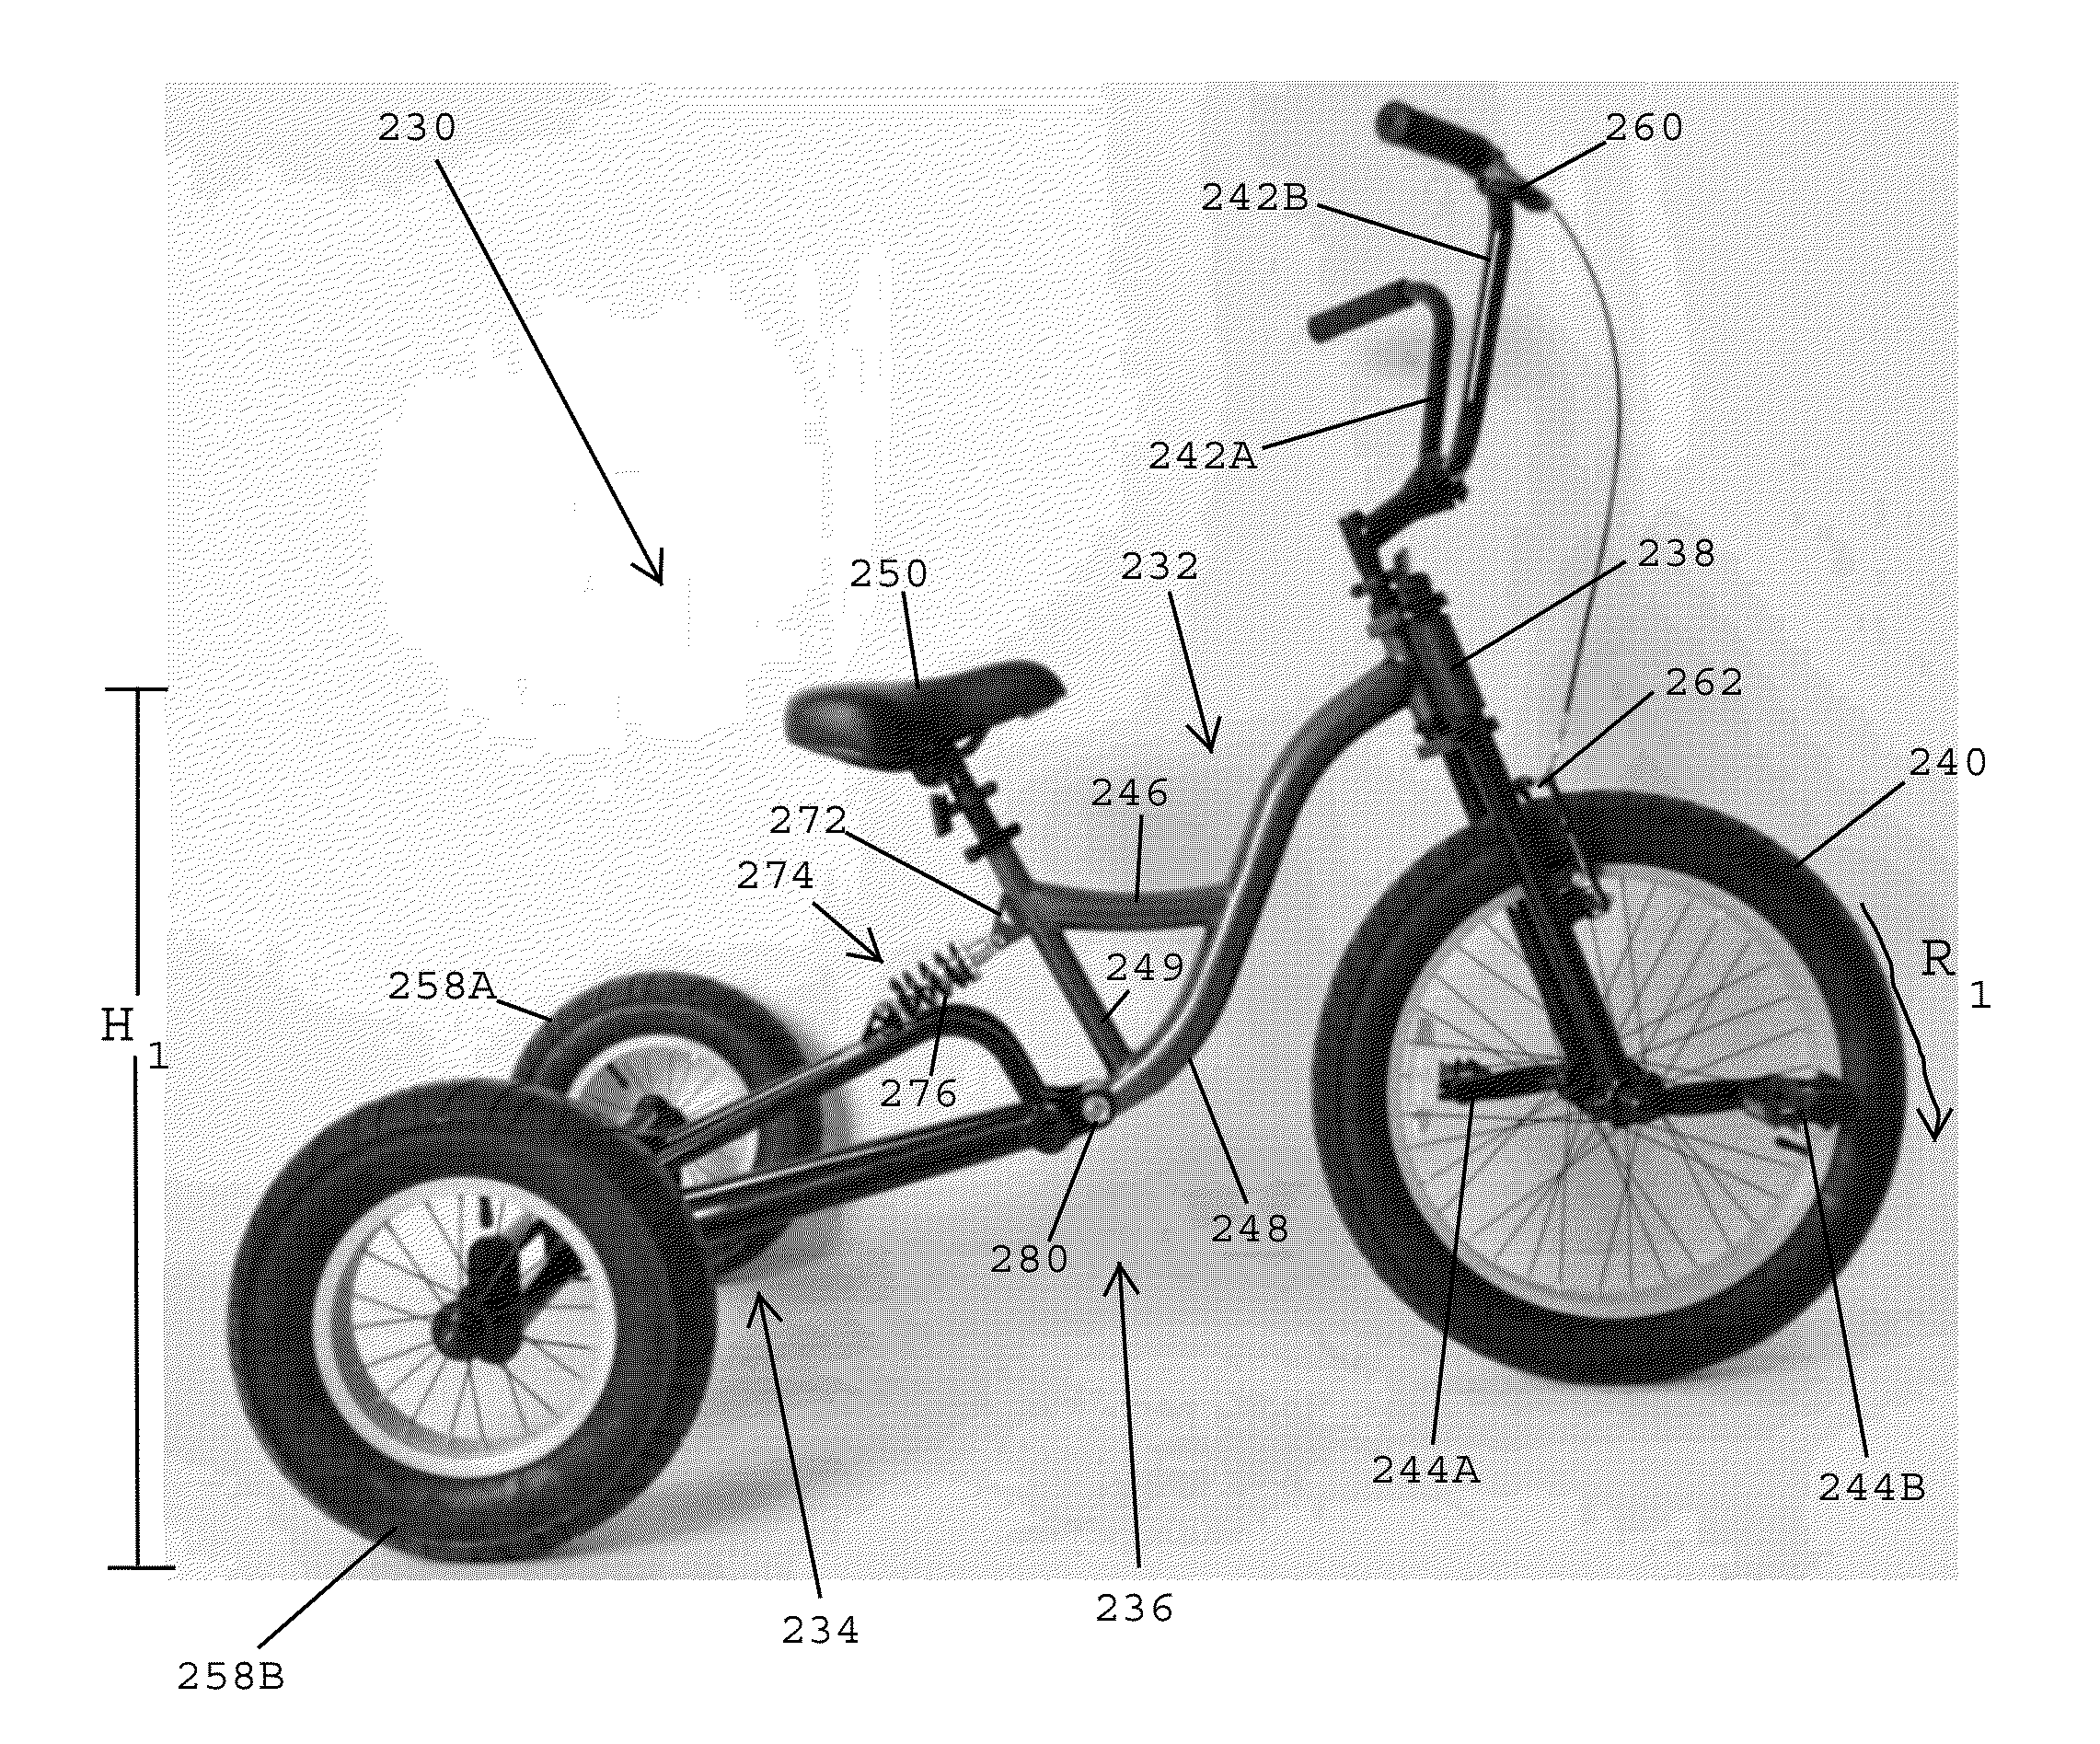 Adult tricycles having pivoting frames, suspension systems and enhanced stability